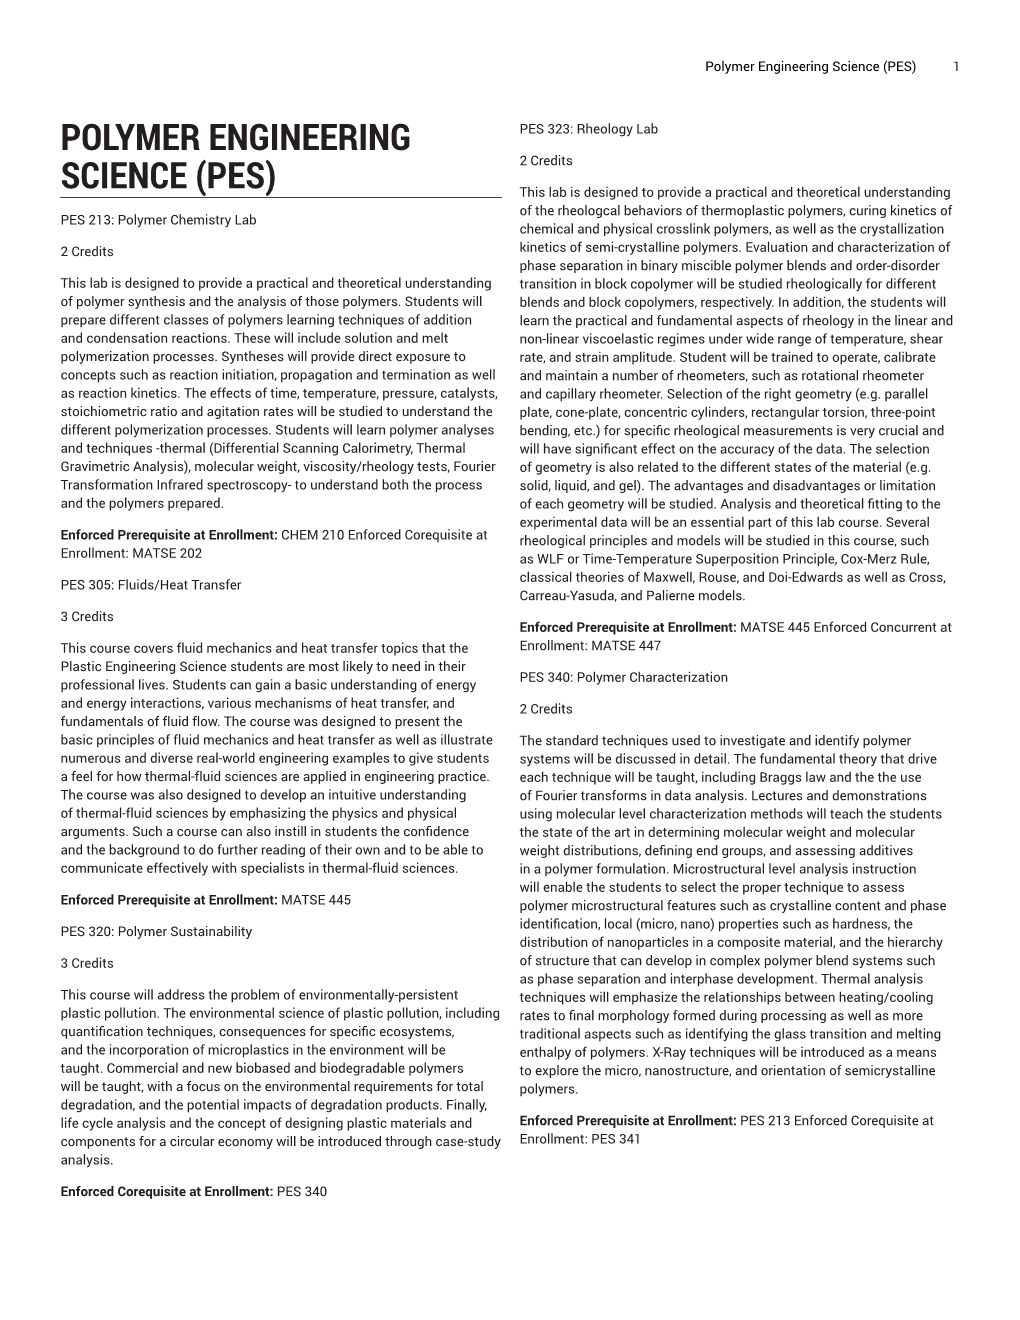 Polymer Engineering Science (PES) 1